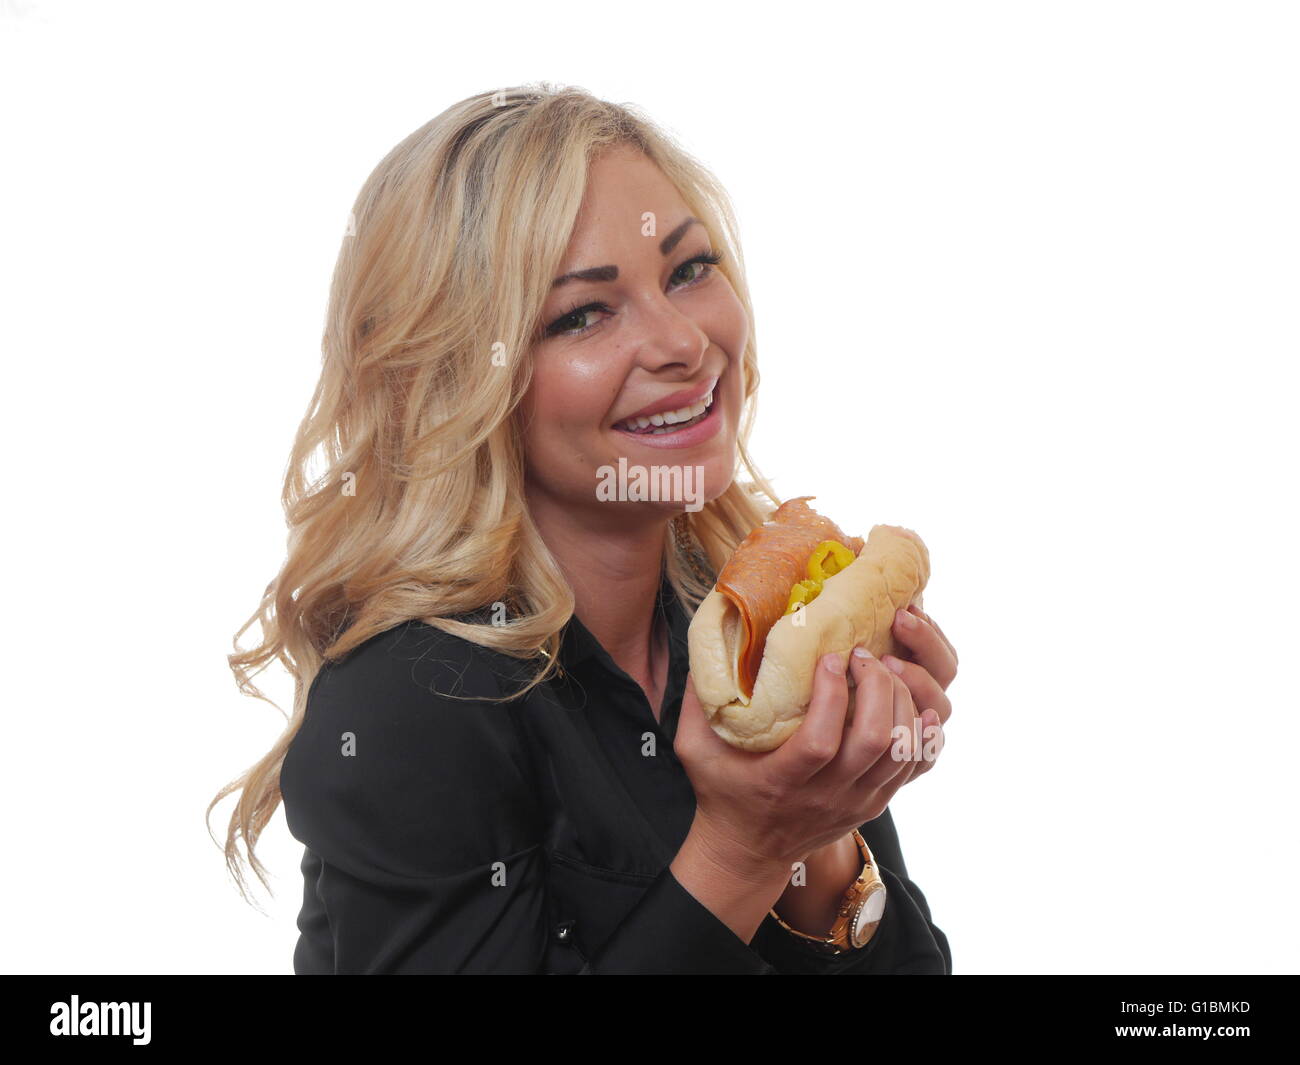 A pretty blond woman is eating a sandwich. Stock Photo